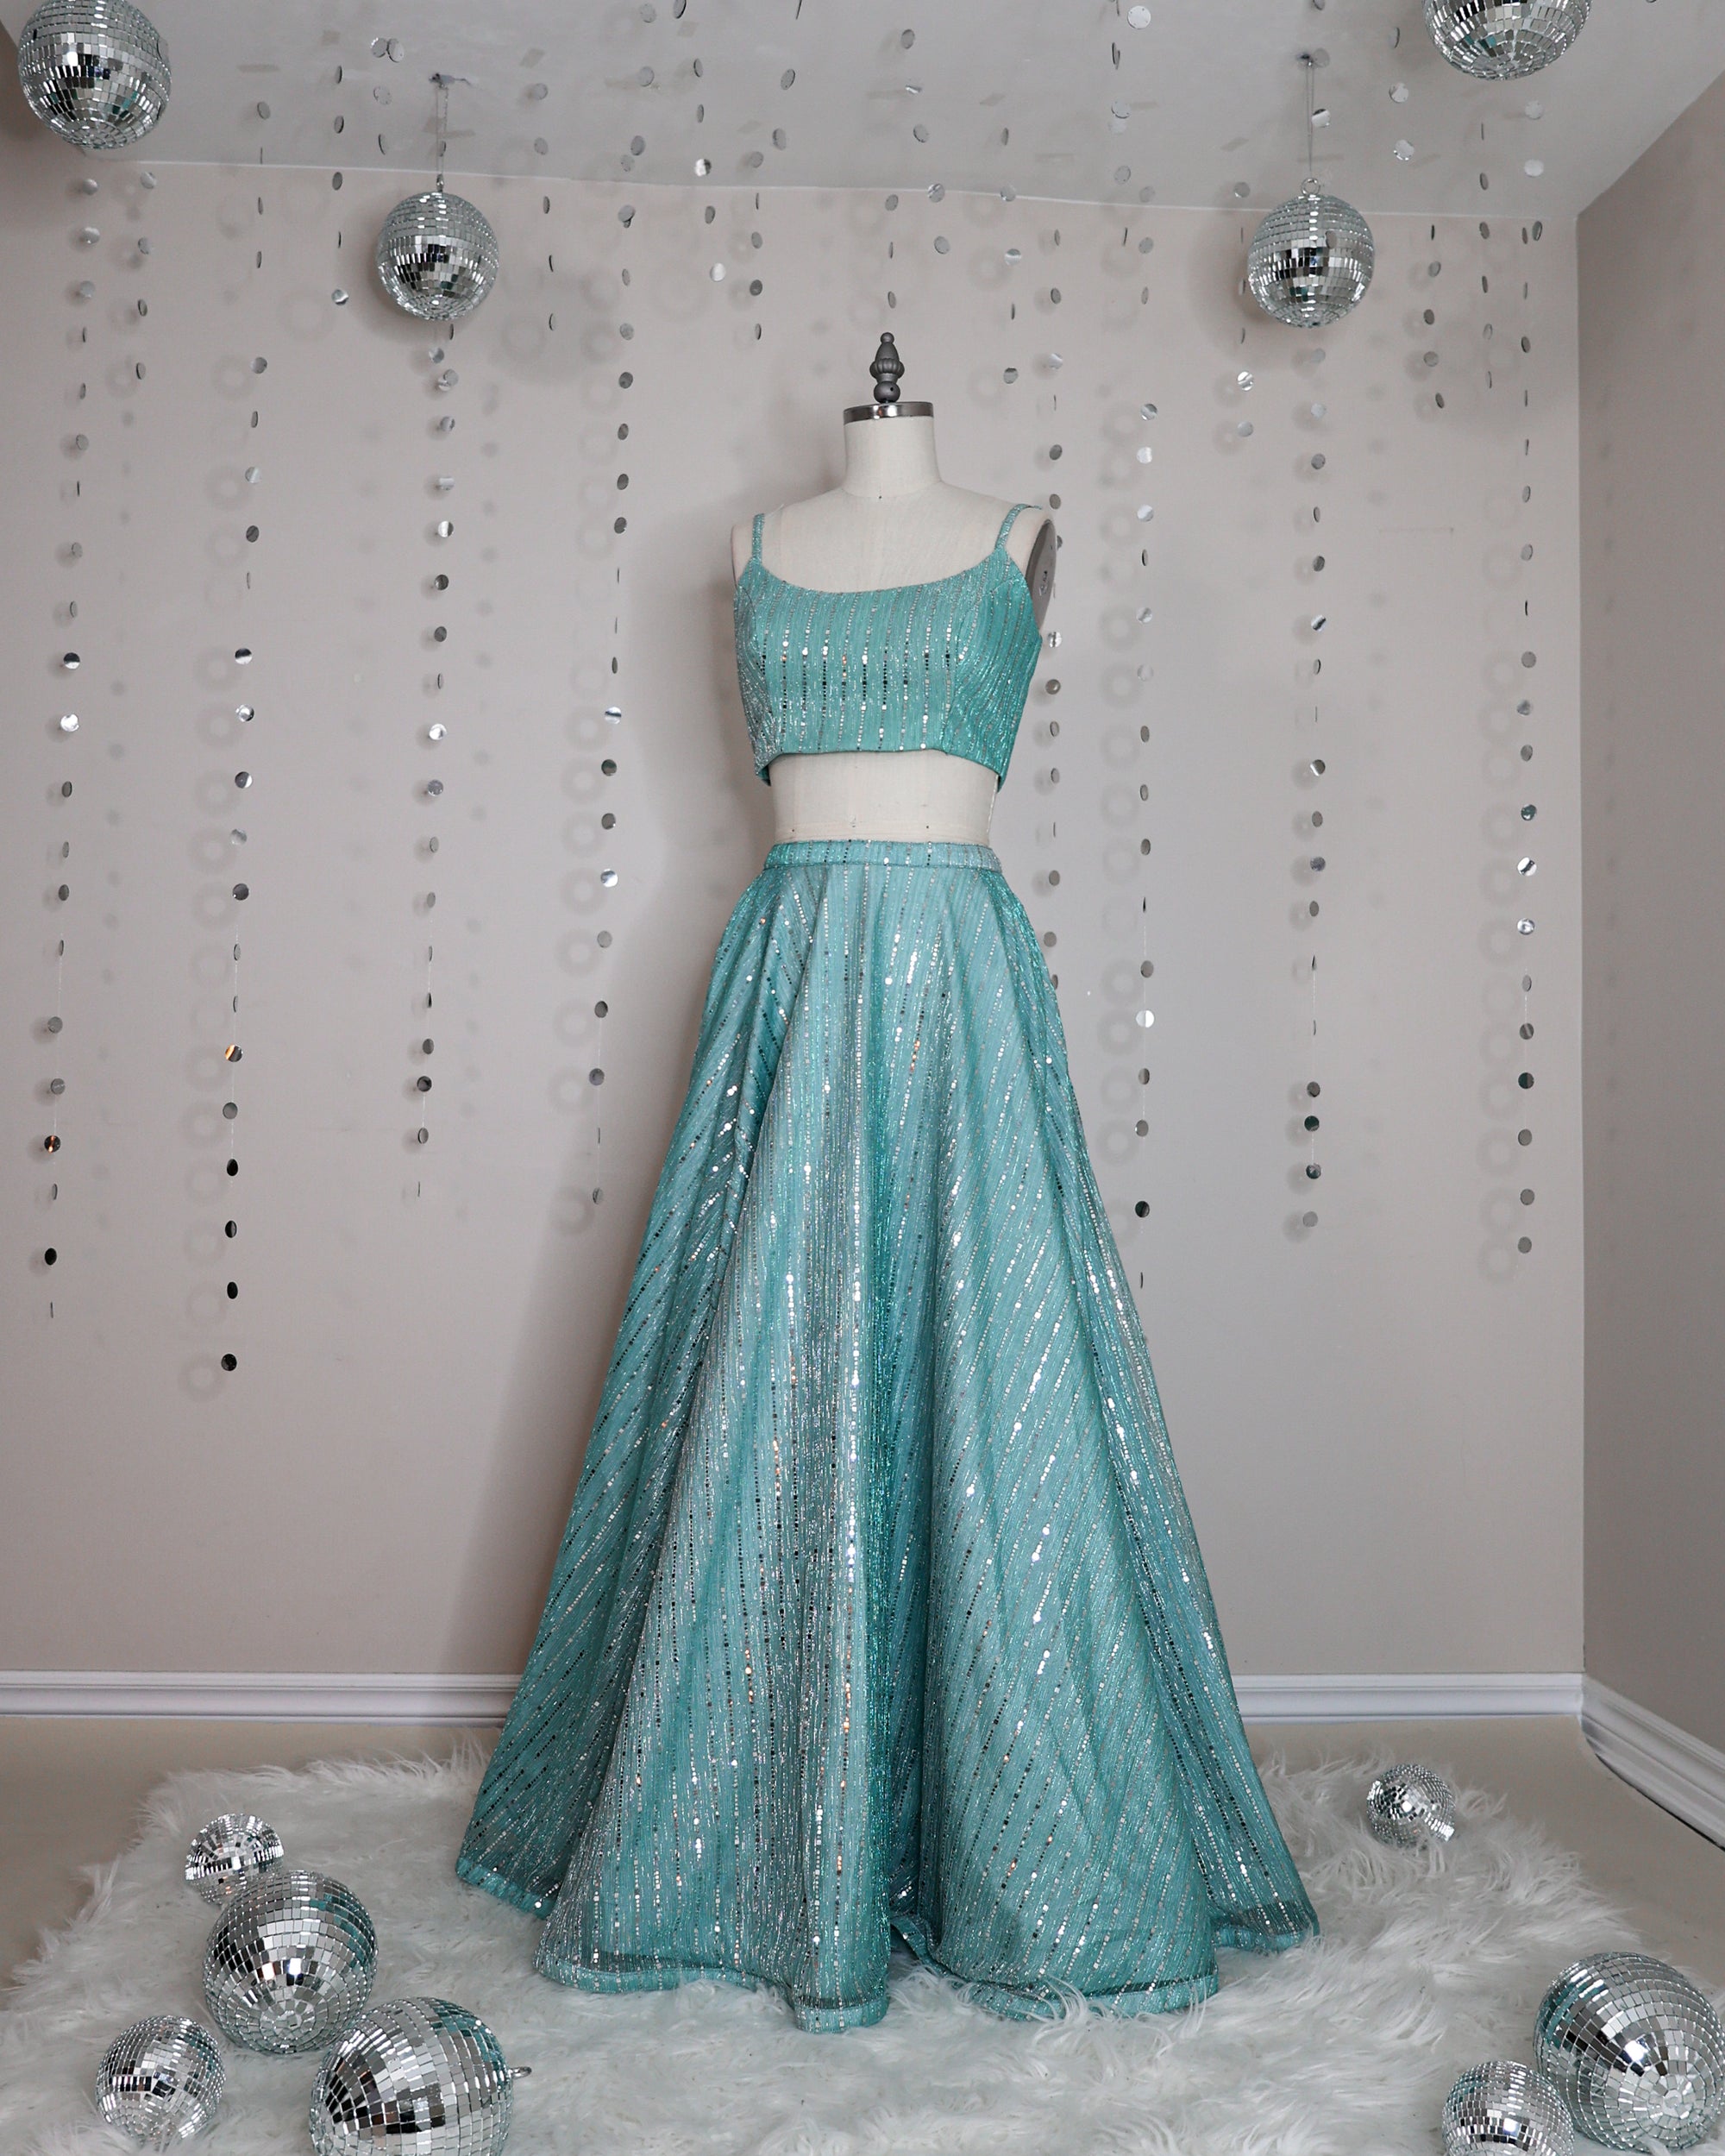 Aqua Blue bling bustier style croptop lehenga blouse with adjustable straps